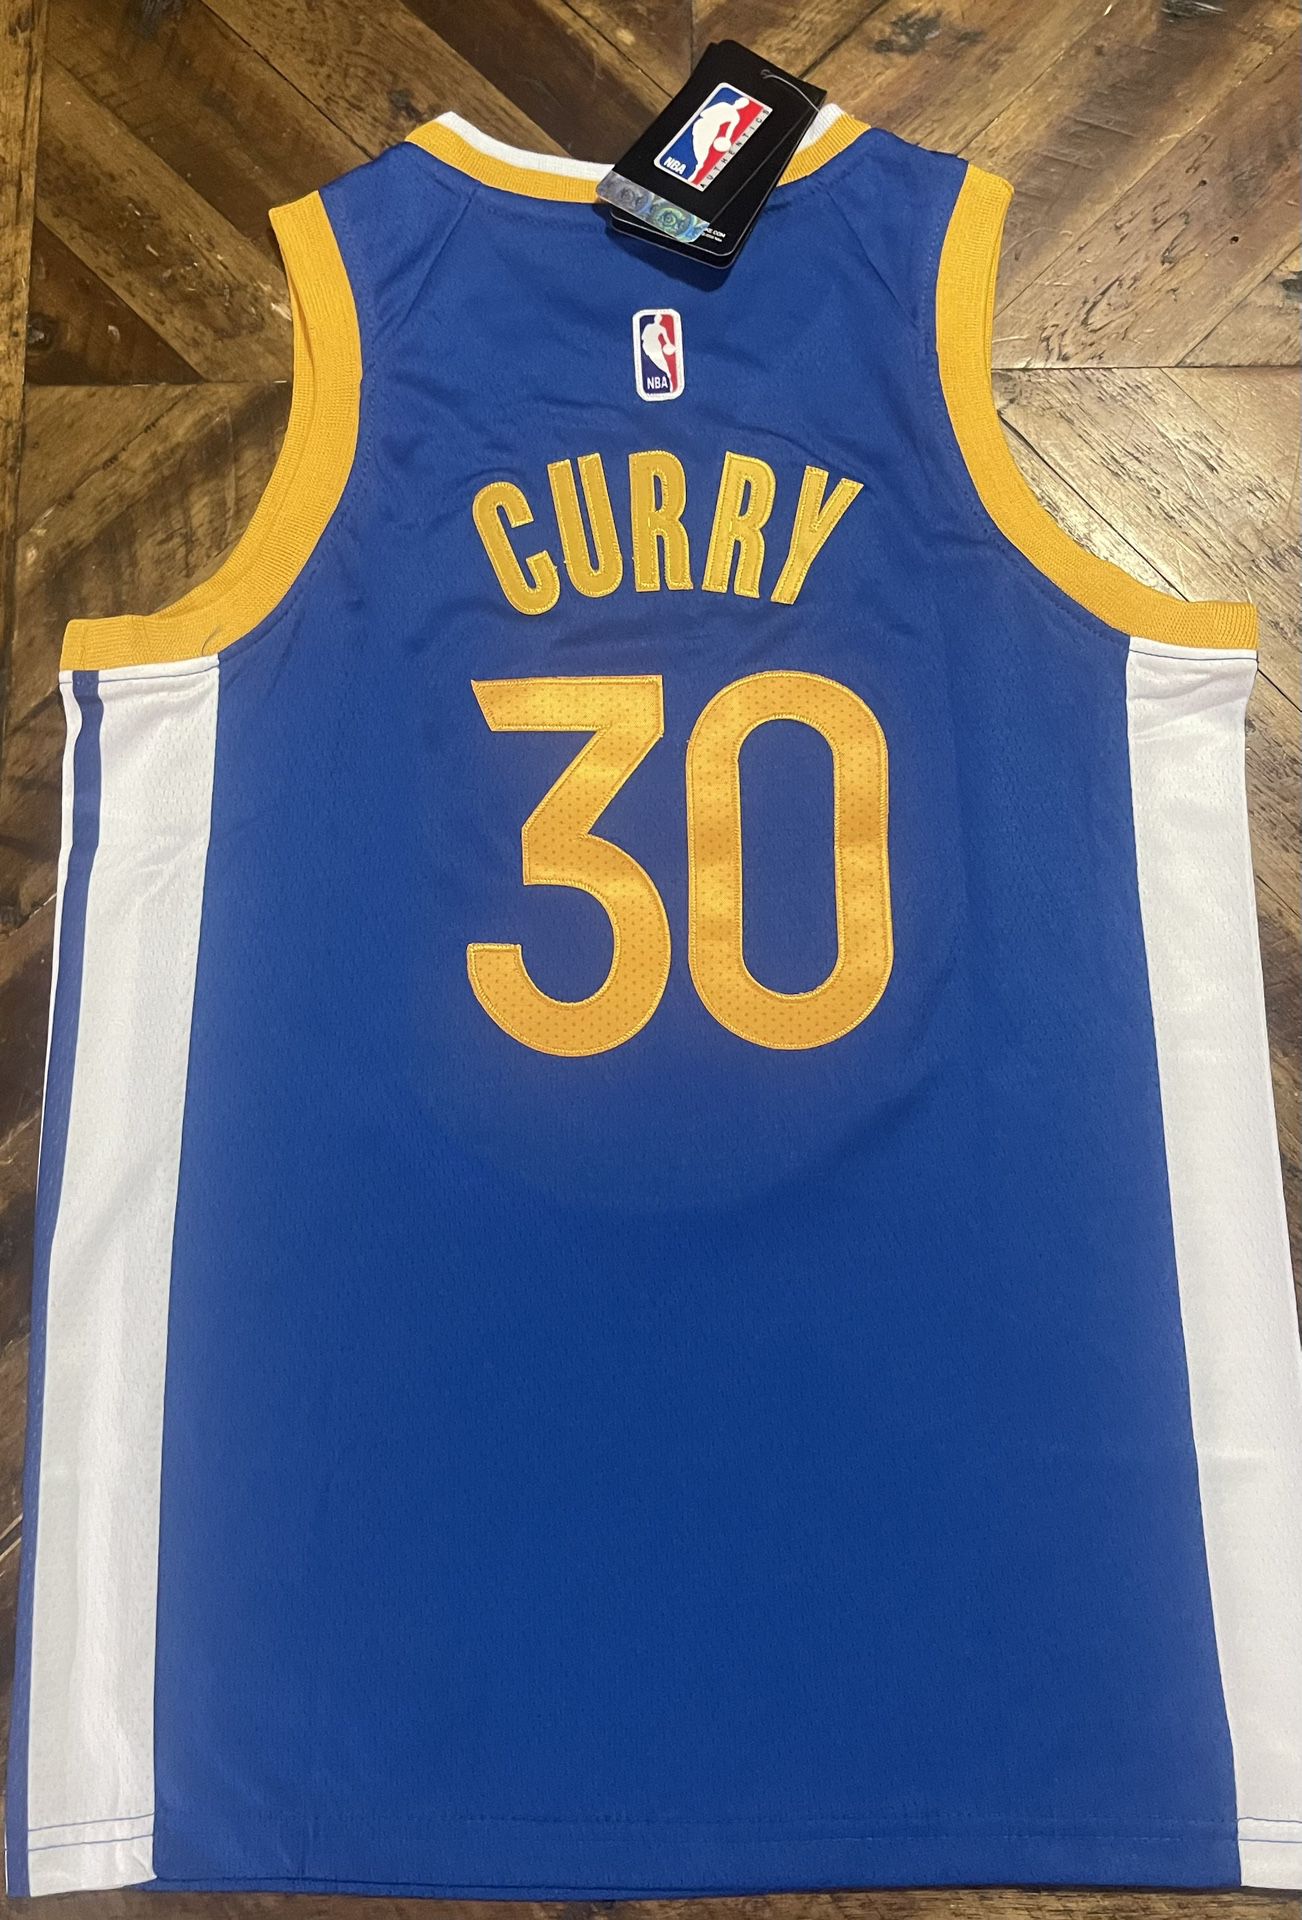 Curry Youth Jersey!!!!!